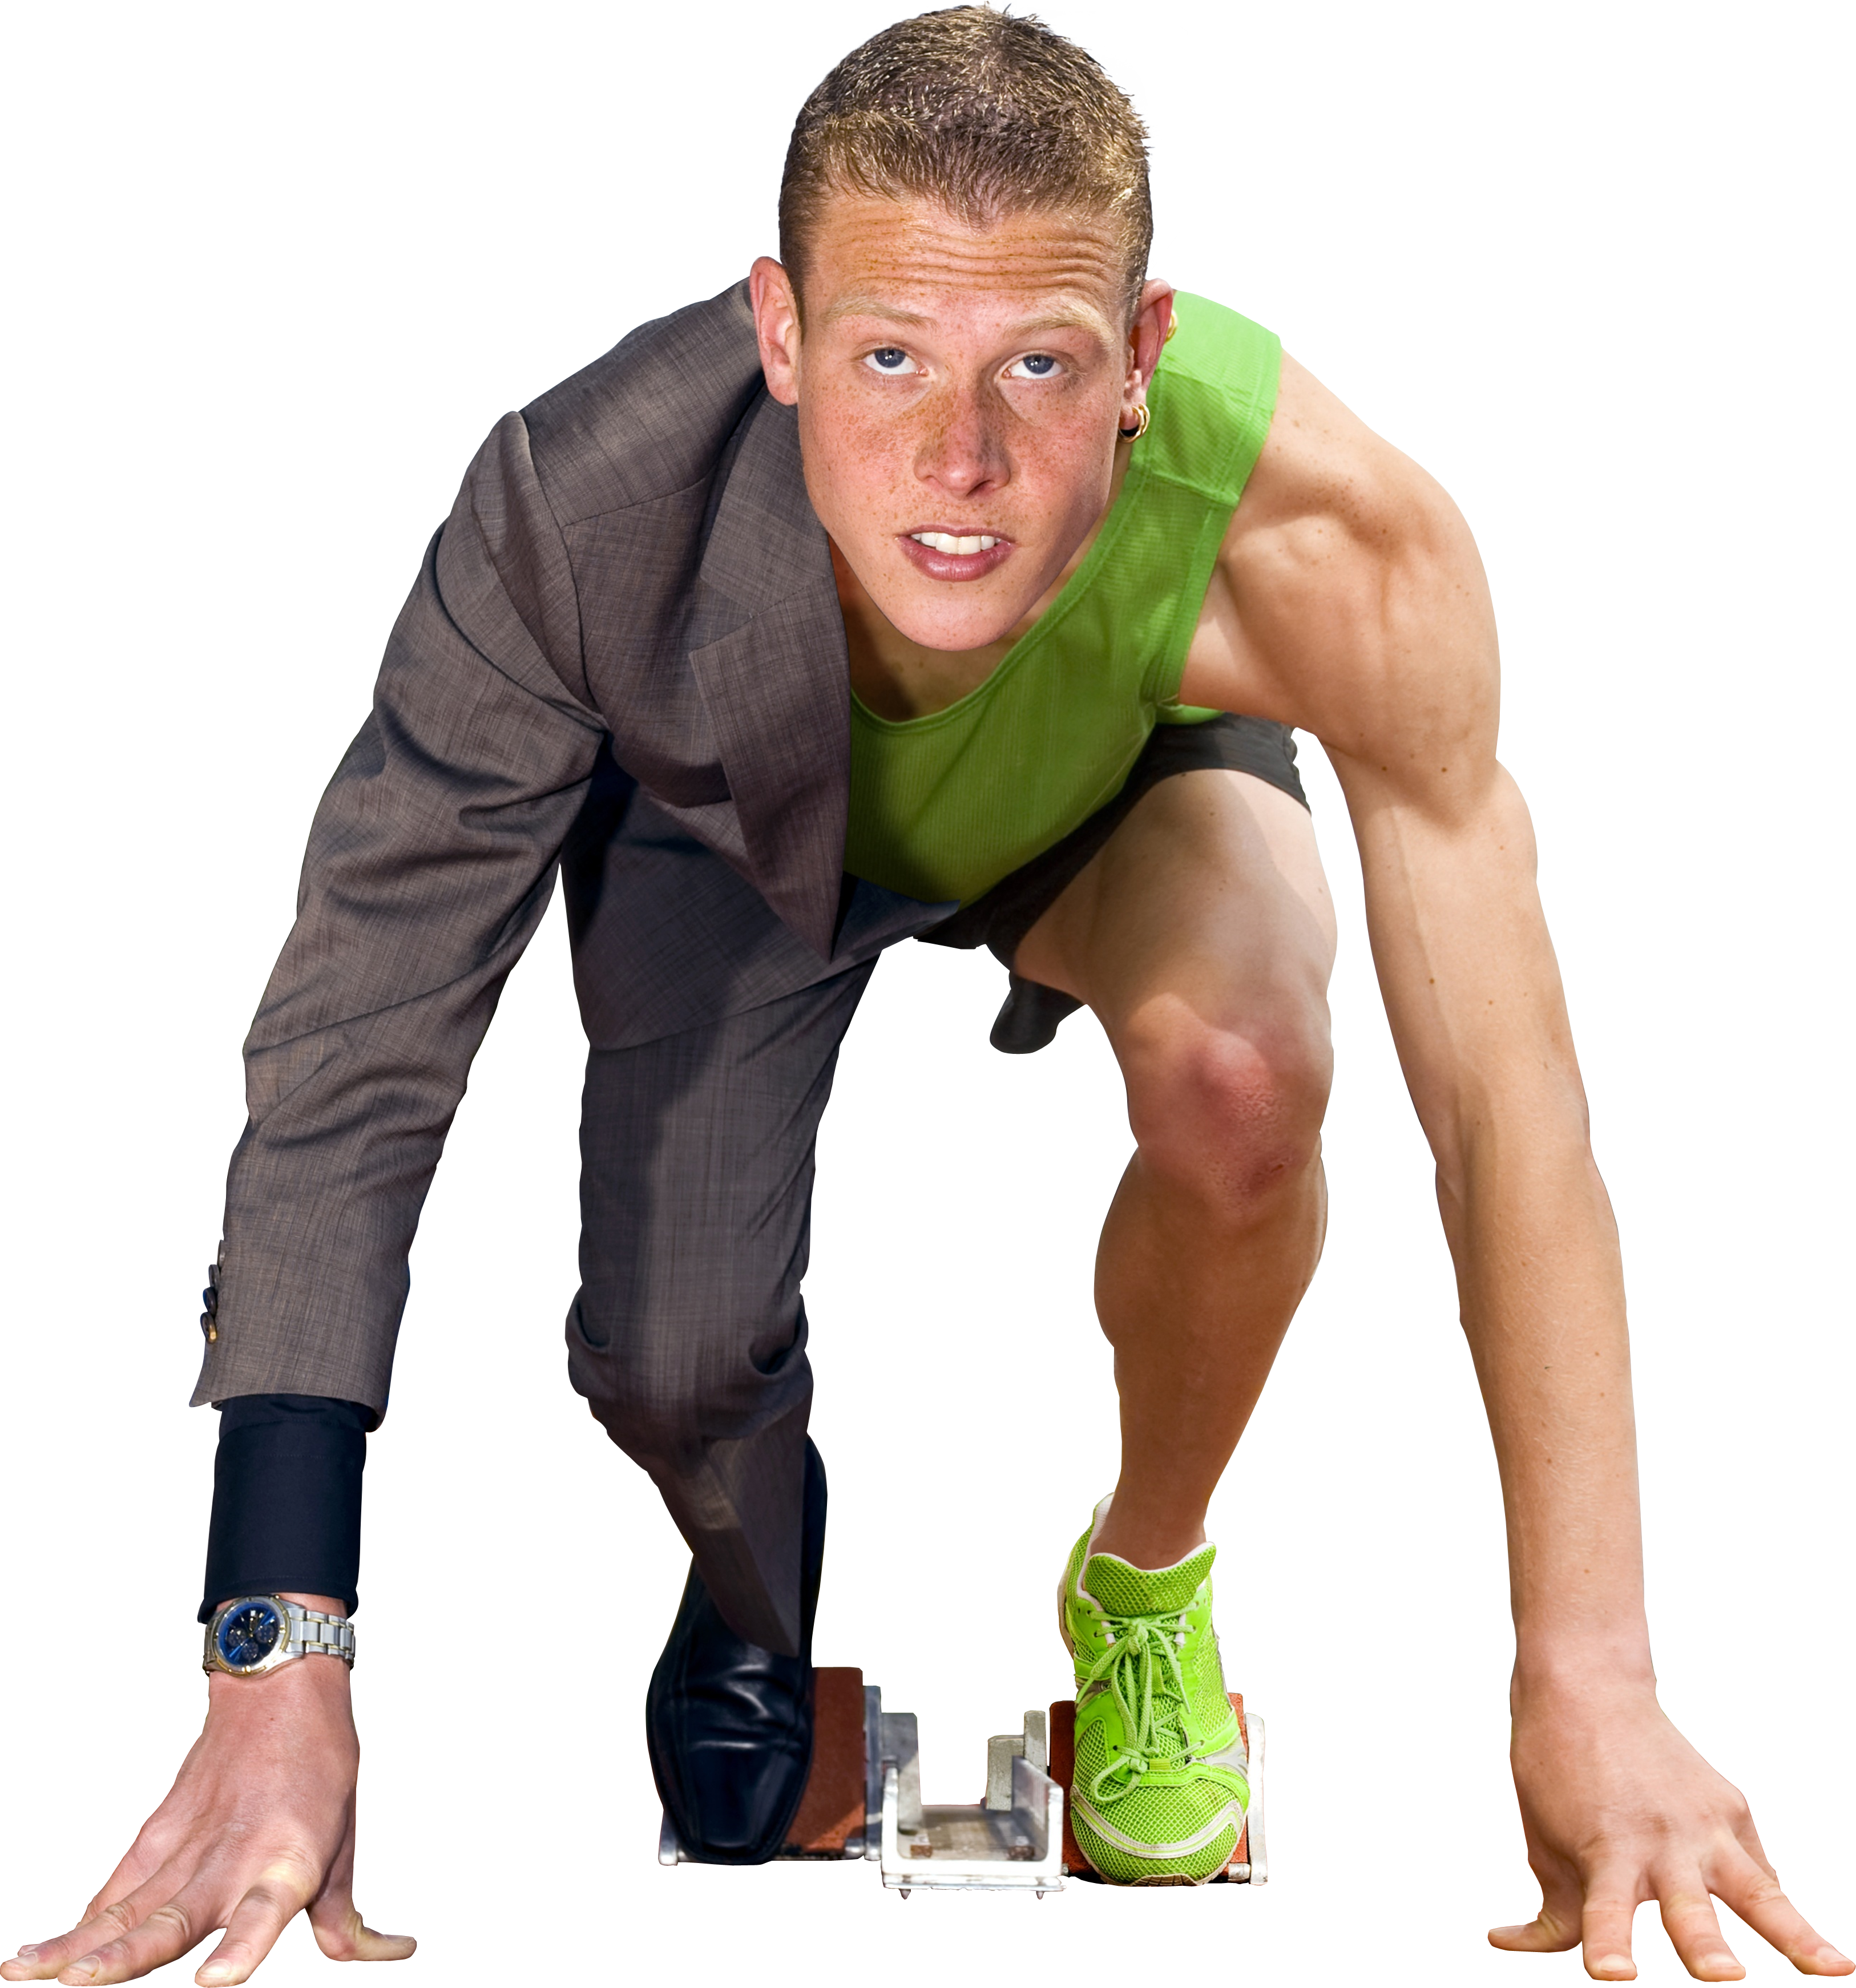 A Man In A Suit And Green Shirt On A Starting Block